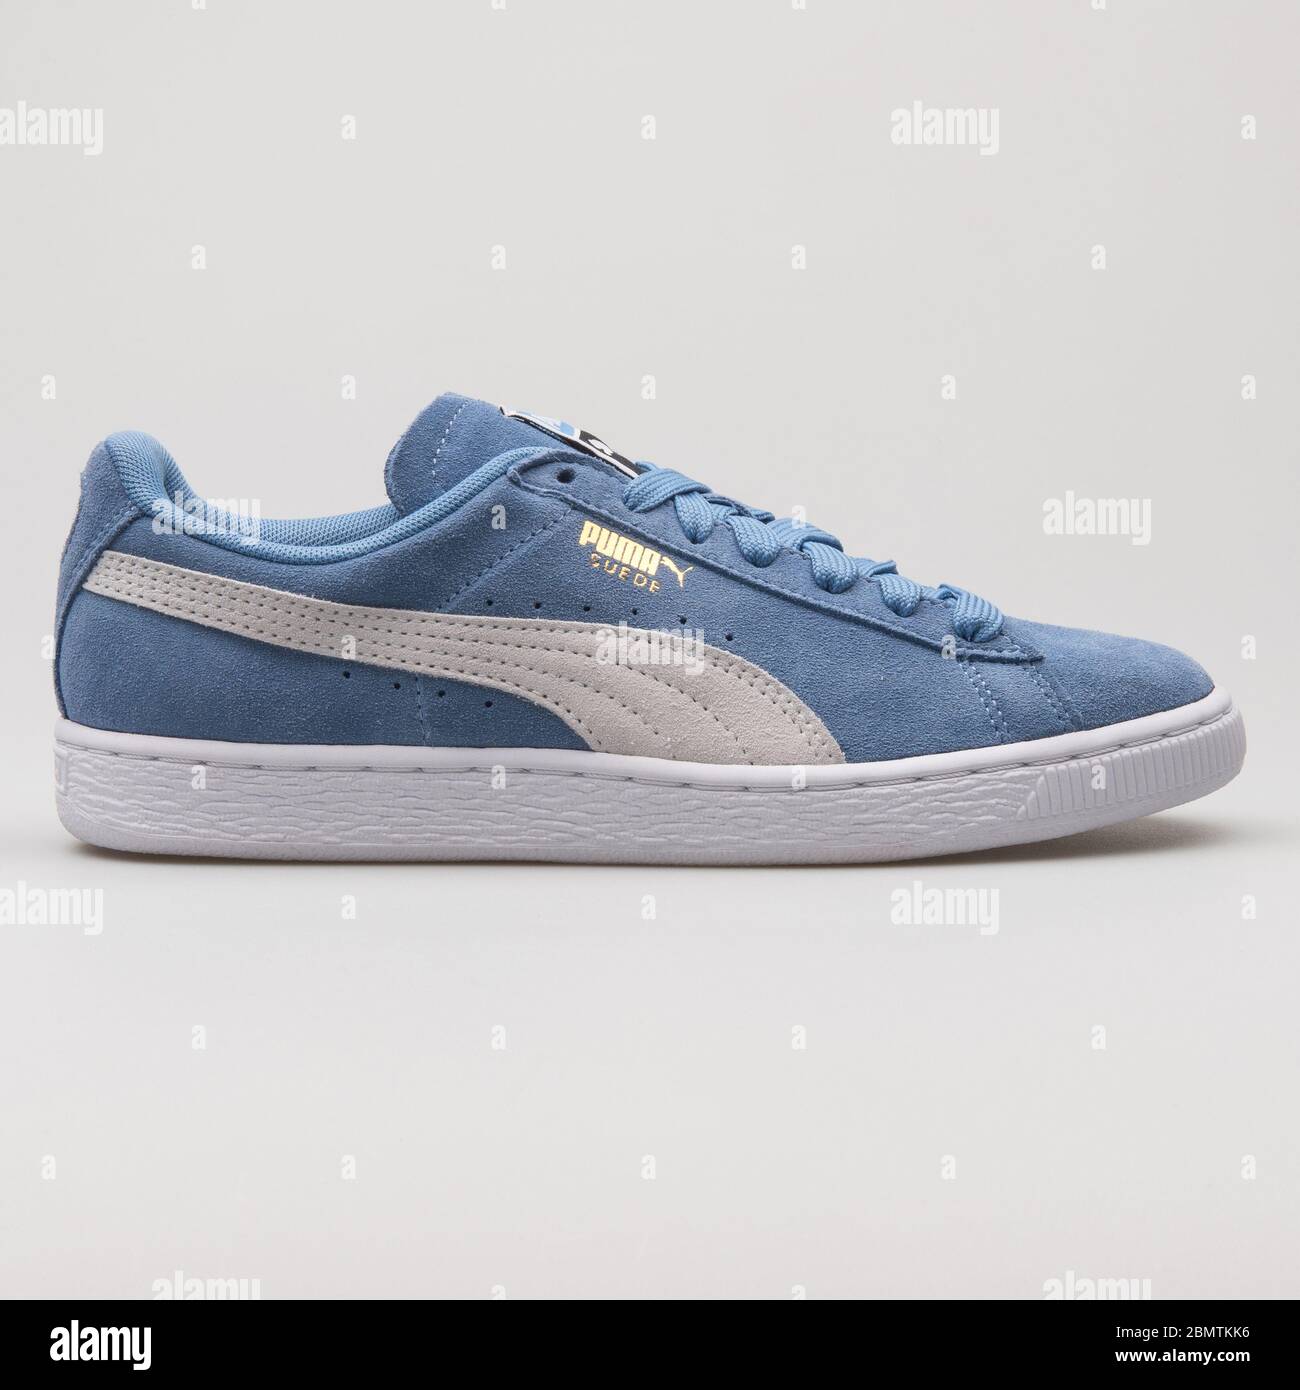 VIENNA, AUSTRIA - FEBRUARY 19, 2018: Puma Suede Classic blue and white  sneaker on white background Stock Photo - Alamy